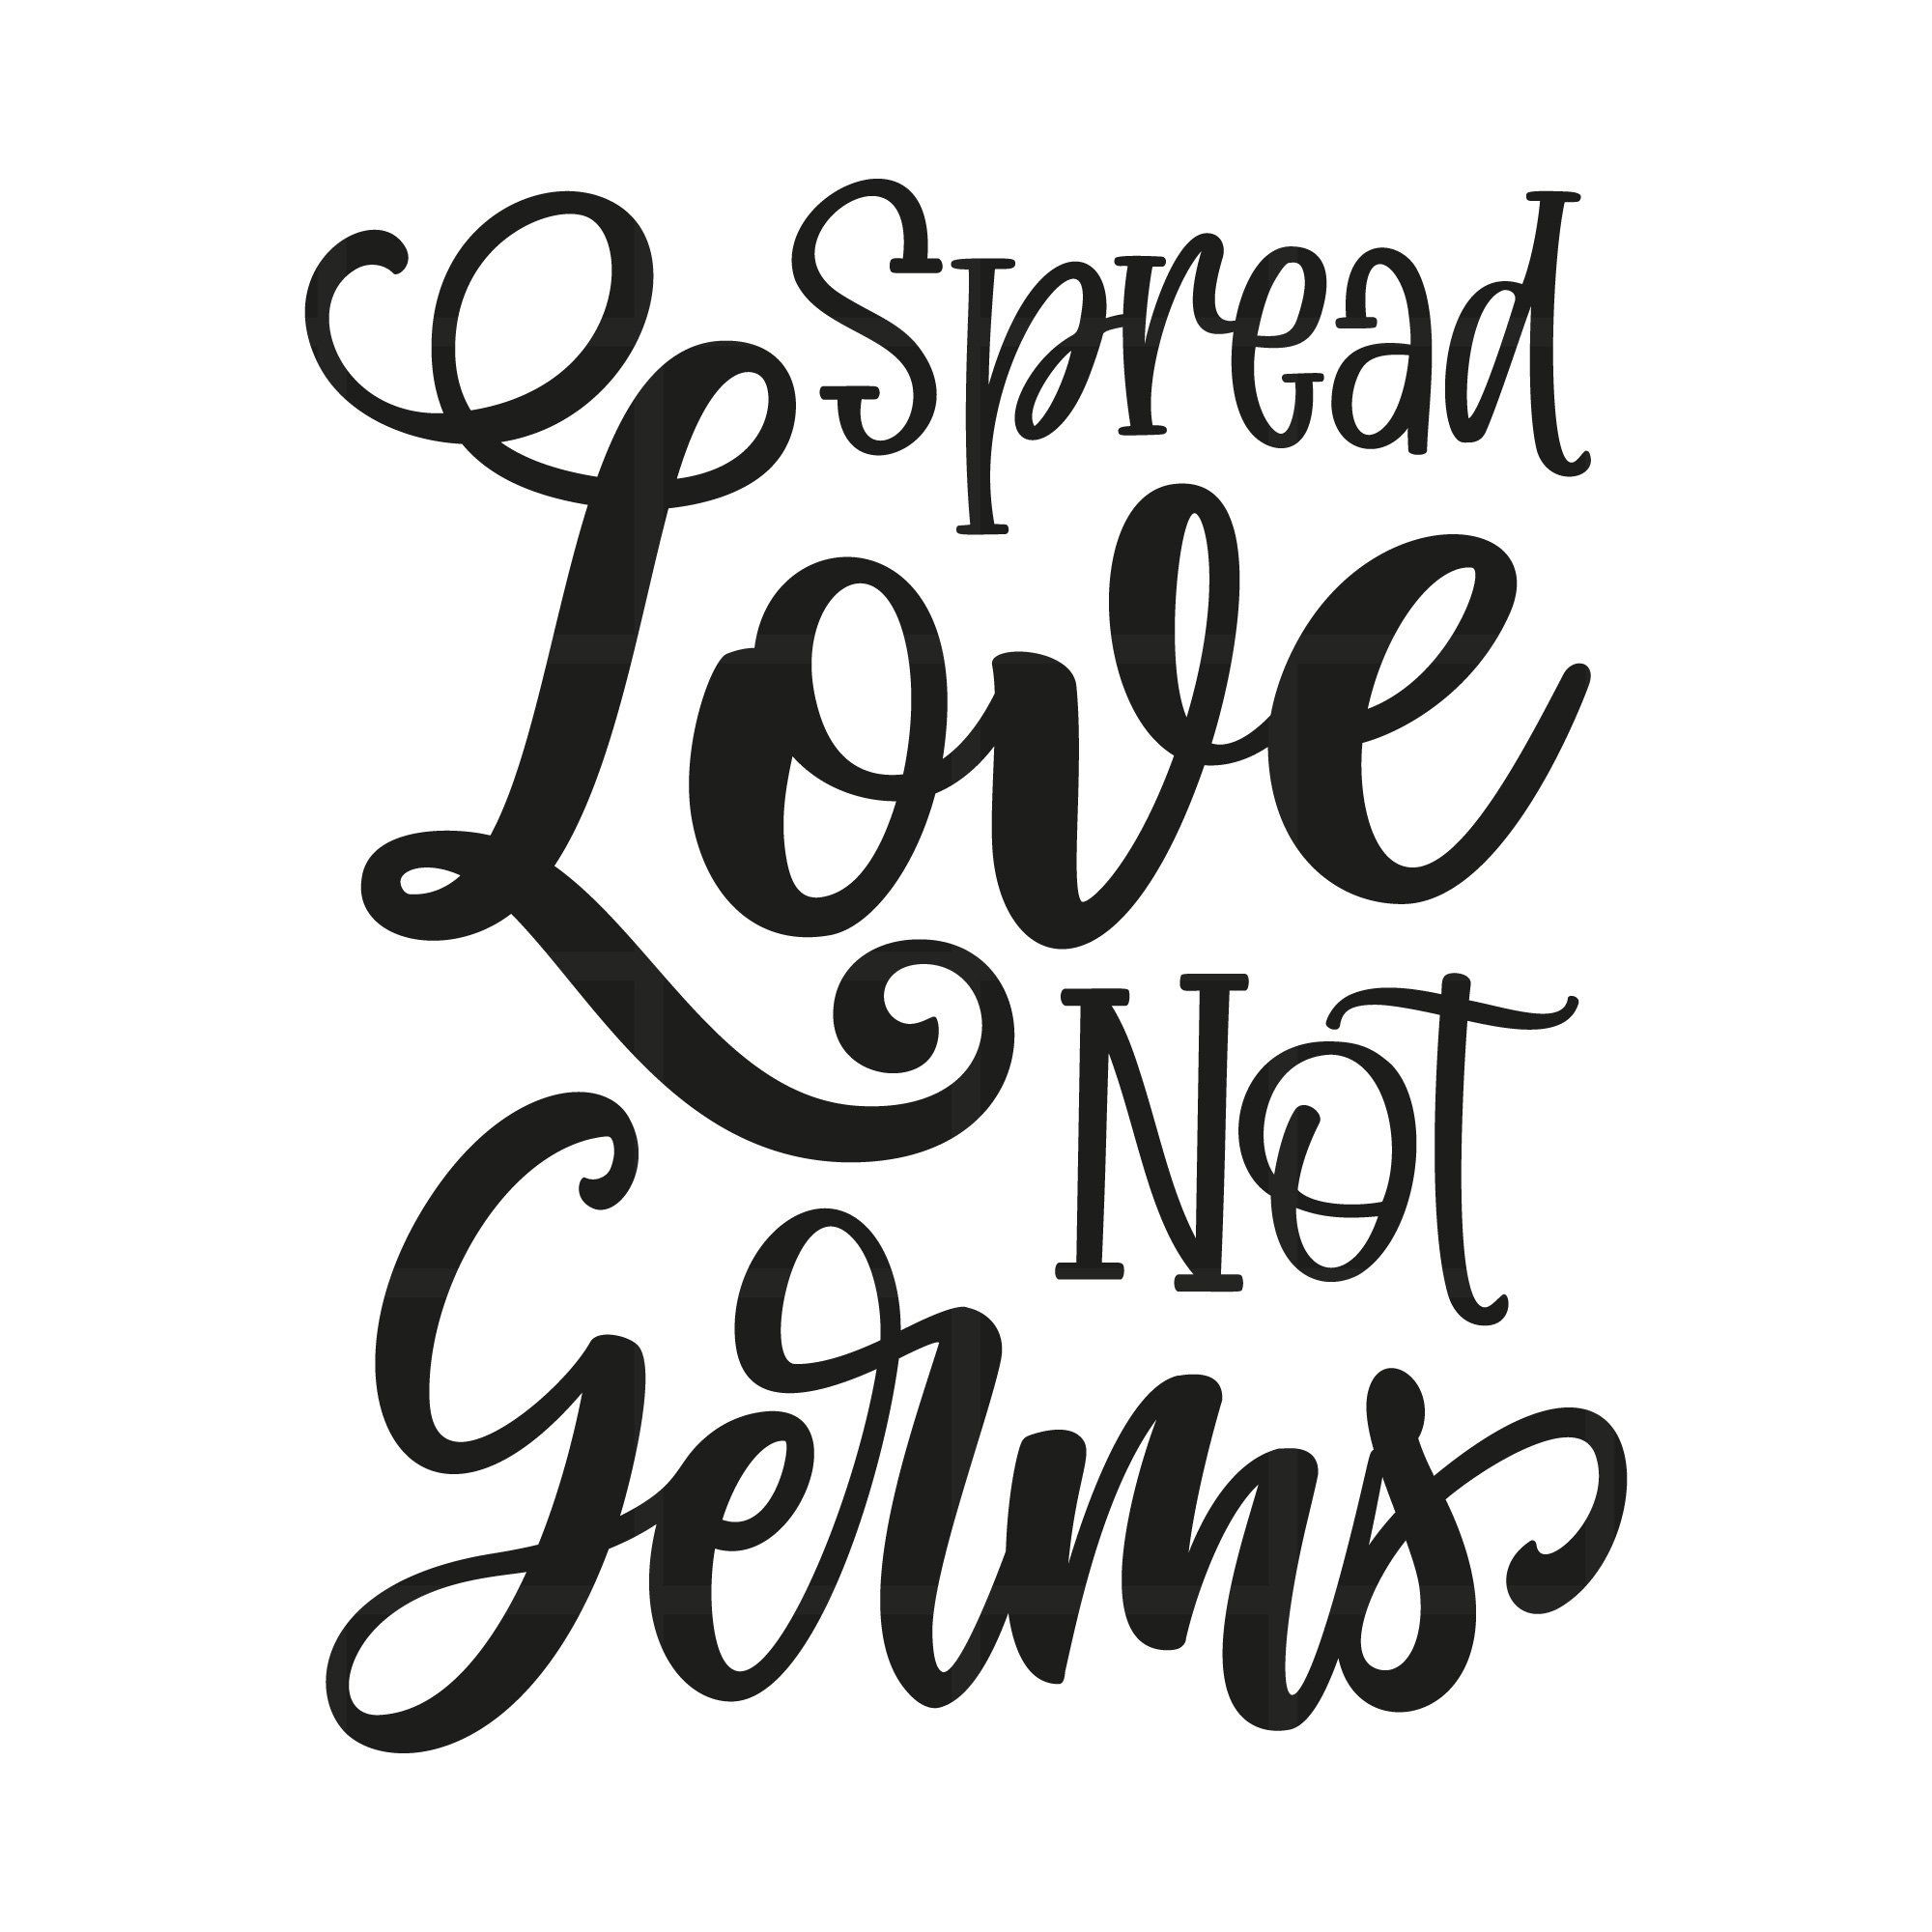 Spread Love Not Germs Svg Png Eps Pdf Cut Files Funny Quarantine Svg Bathroom Sayings Svg Cricut Silhouette Etsy Spread Love Cricut Sayings